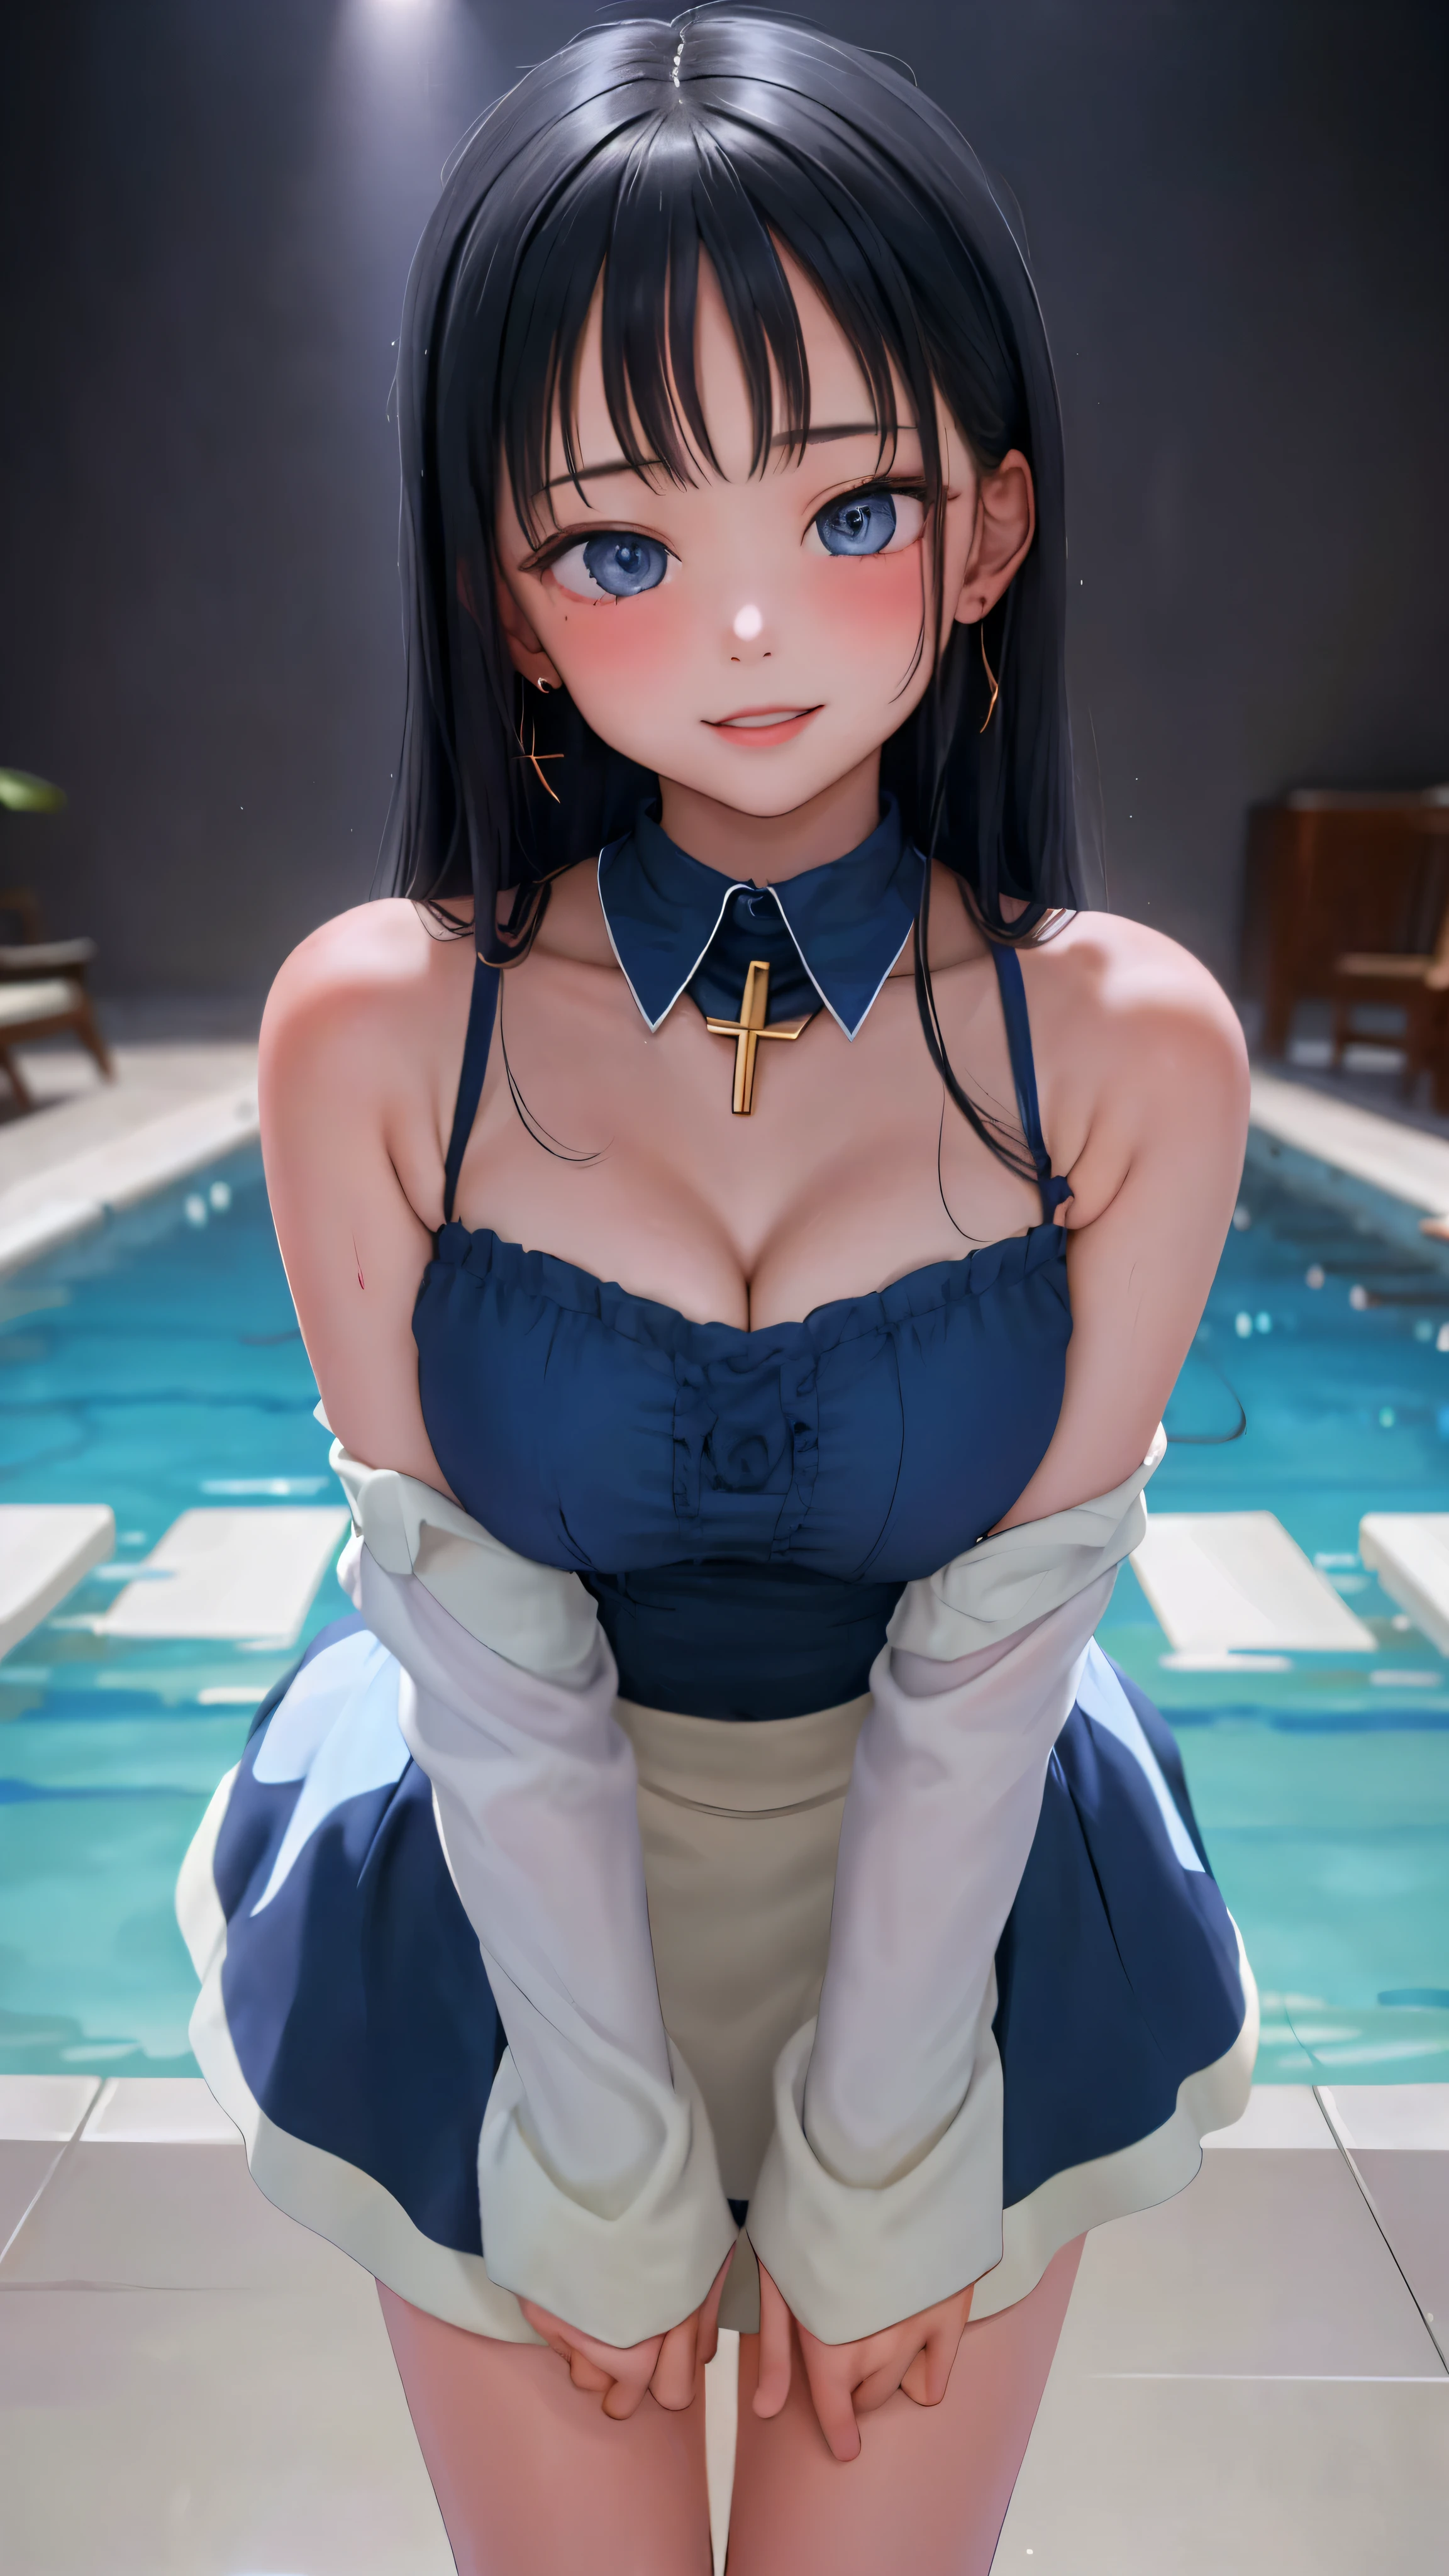 reality、8k、Super high chroma、13 year old girl、face reality、(((Emphasize big breasts and cleavage)))、smile、indoor pool background々sexy pose part 1.5、((()wet with water 1.5)))